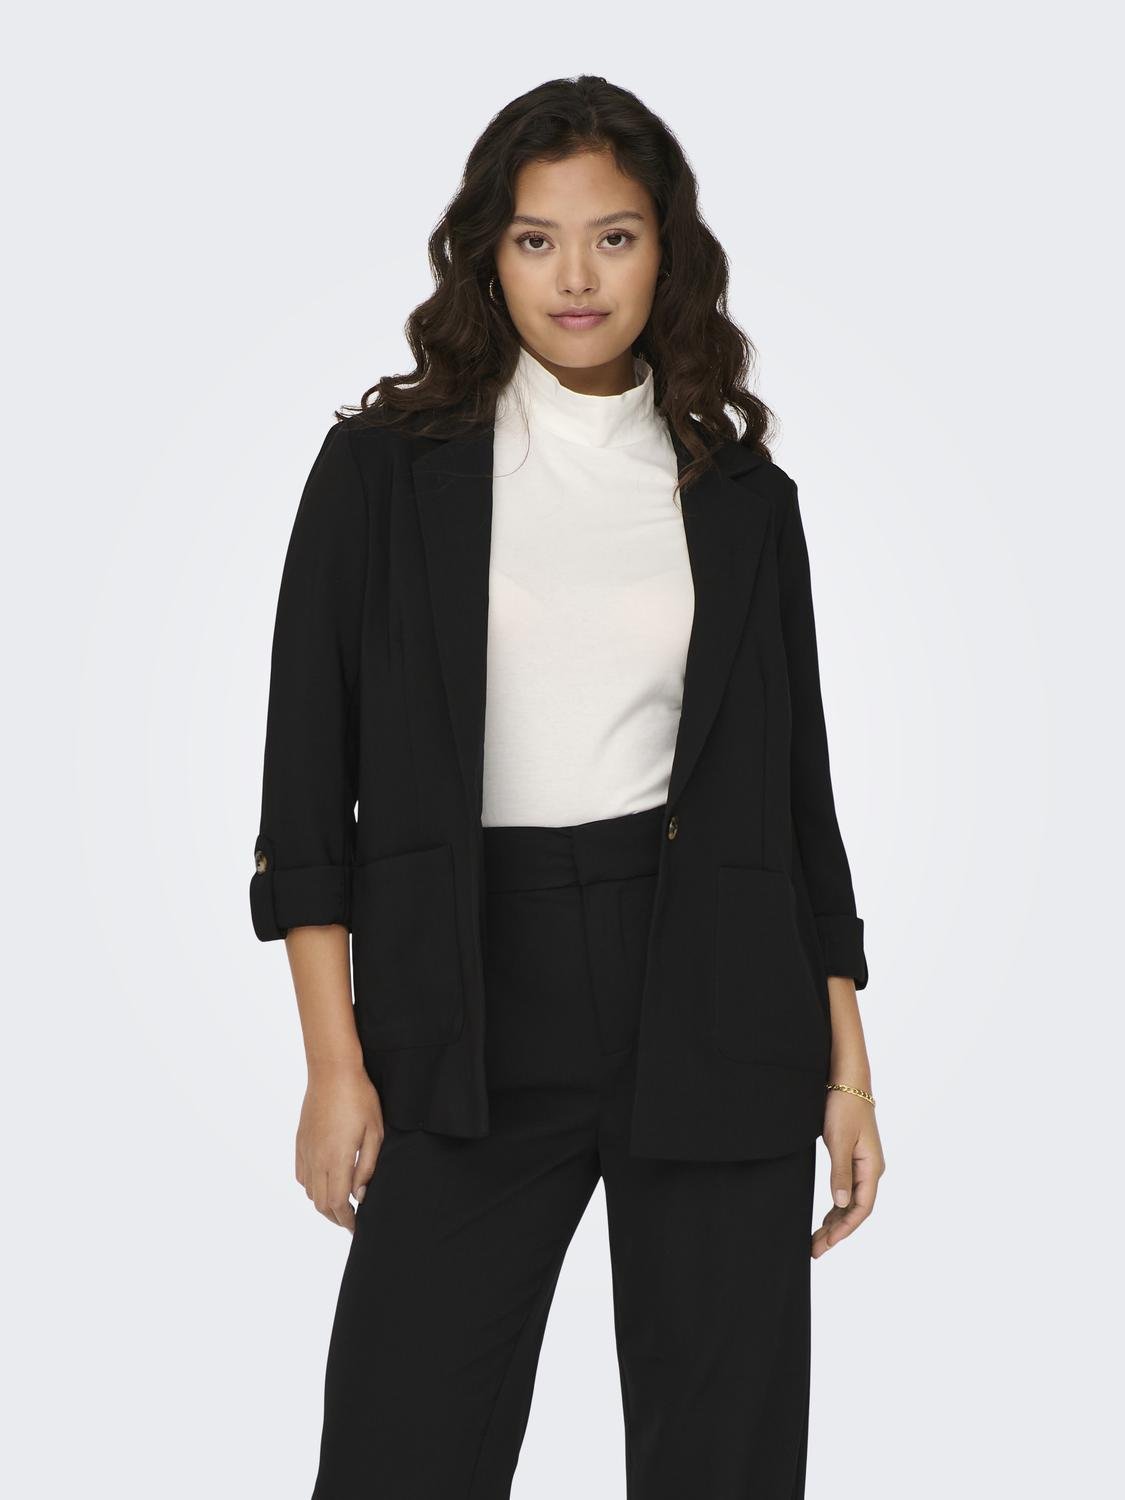 ONLY Classic solid color blazer -Black - 15308877